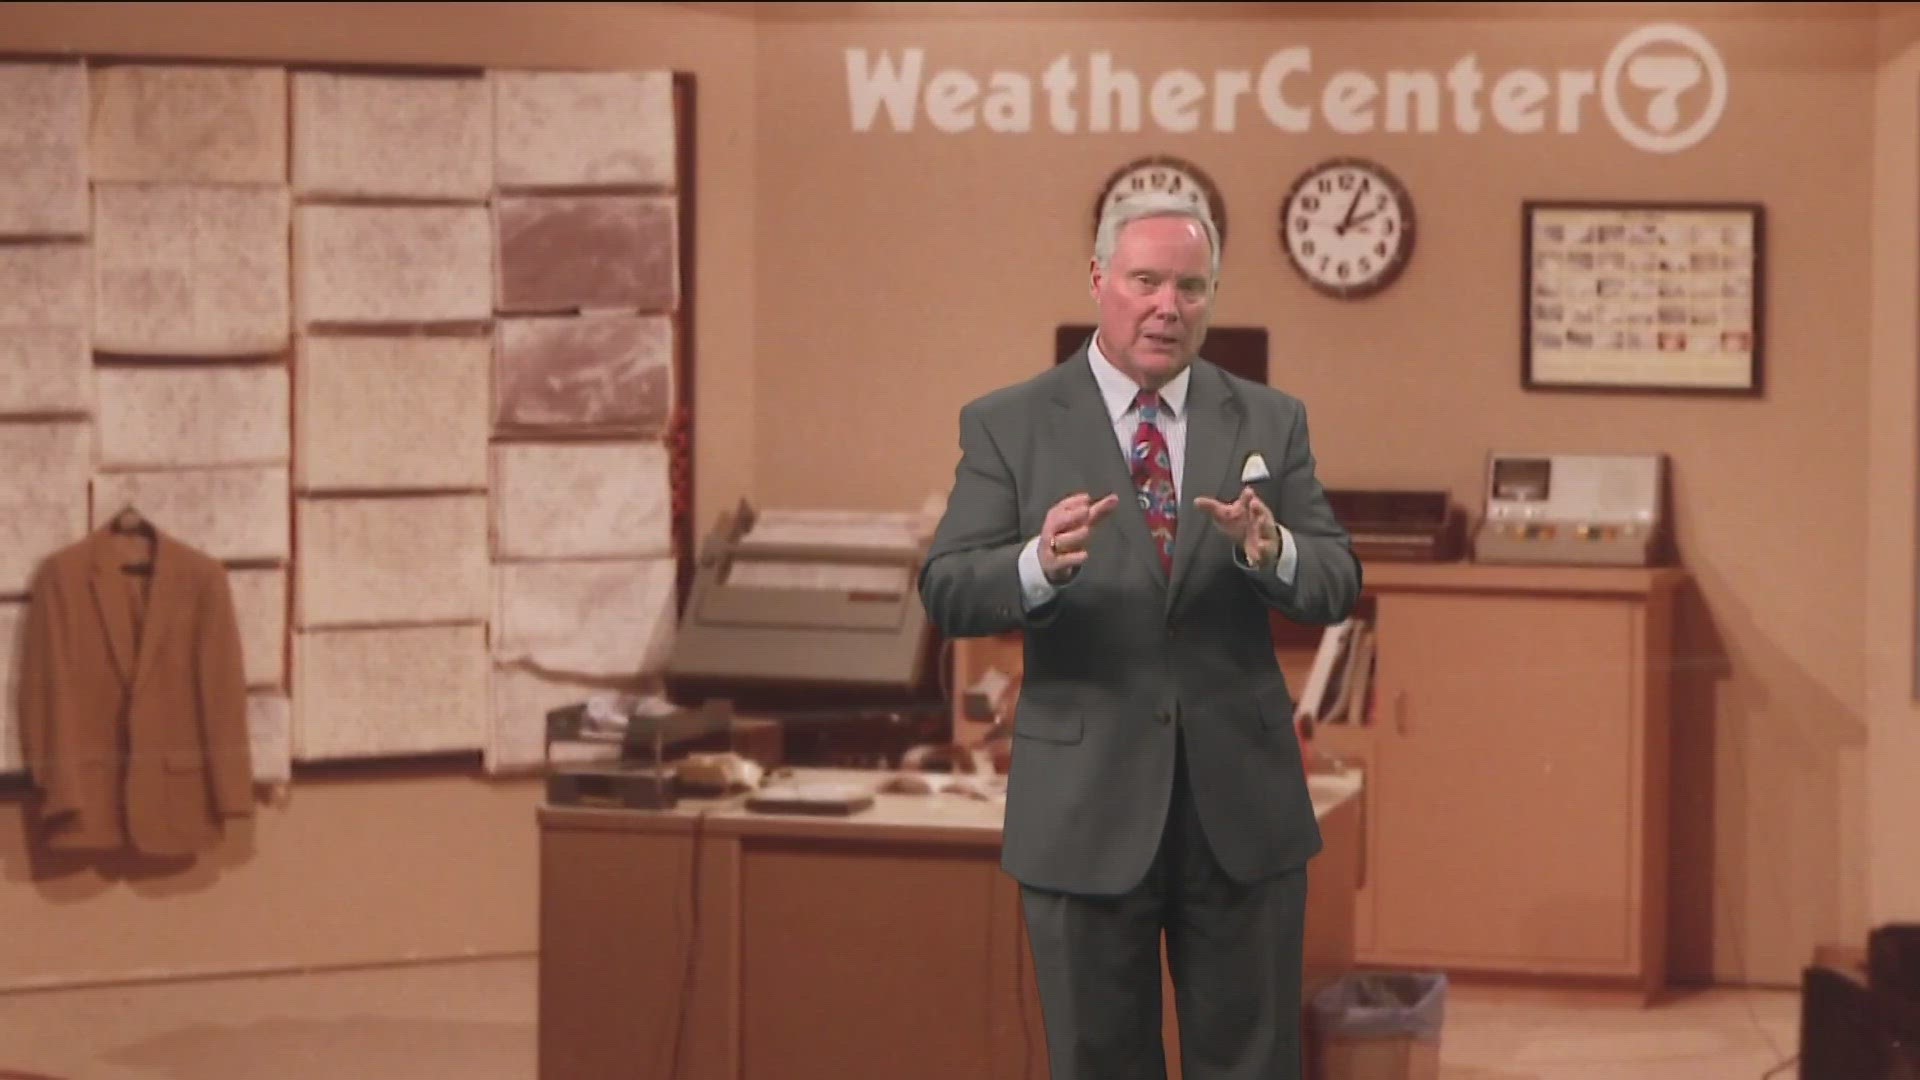 KTVB's Chief Meteorologist shows us weather forecasting from the KTVB studio 40 years ago, when he started working with News Channel 7 in January of 1983.